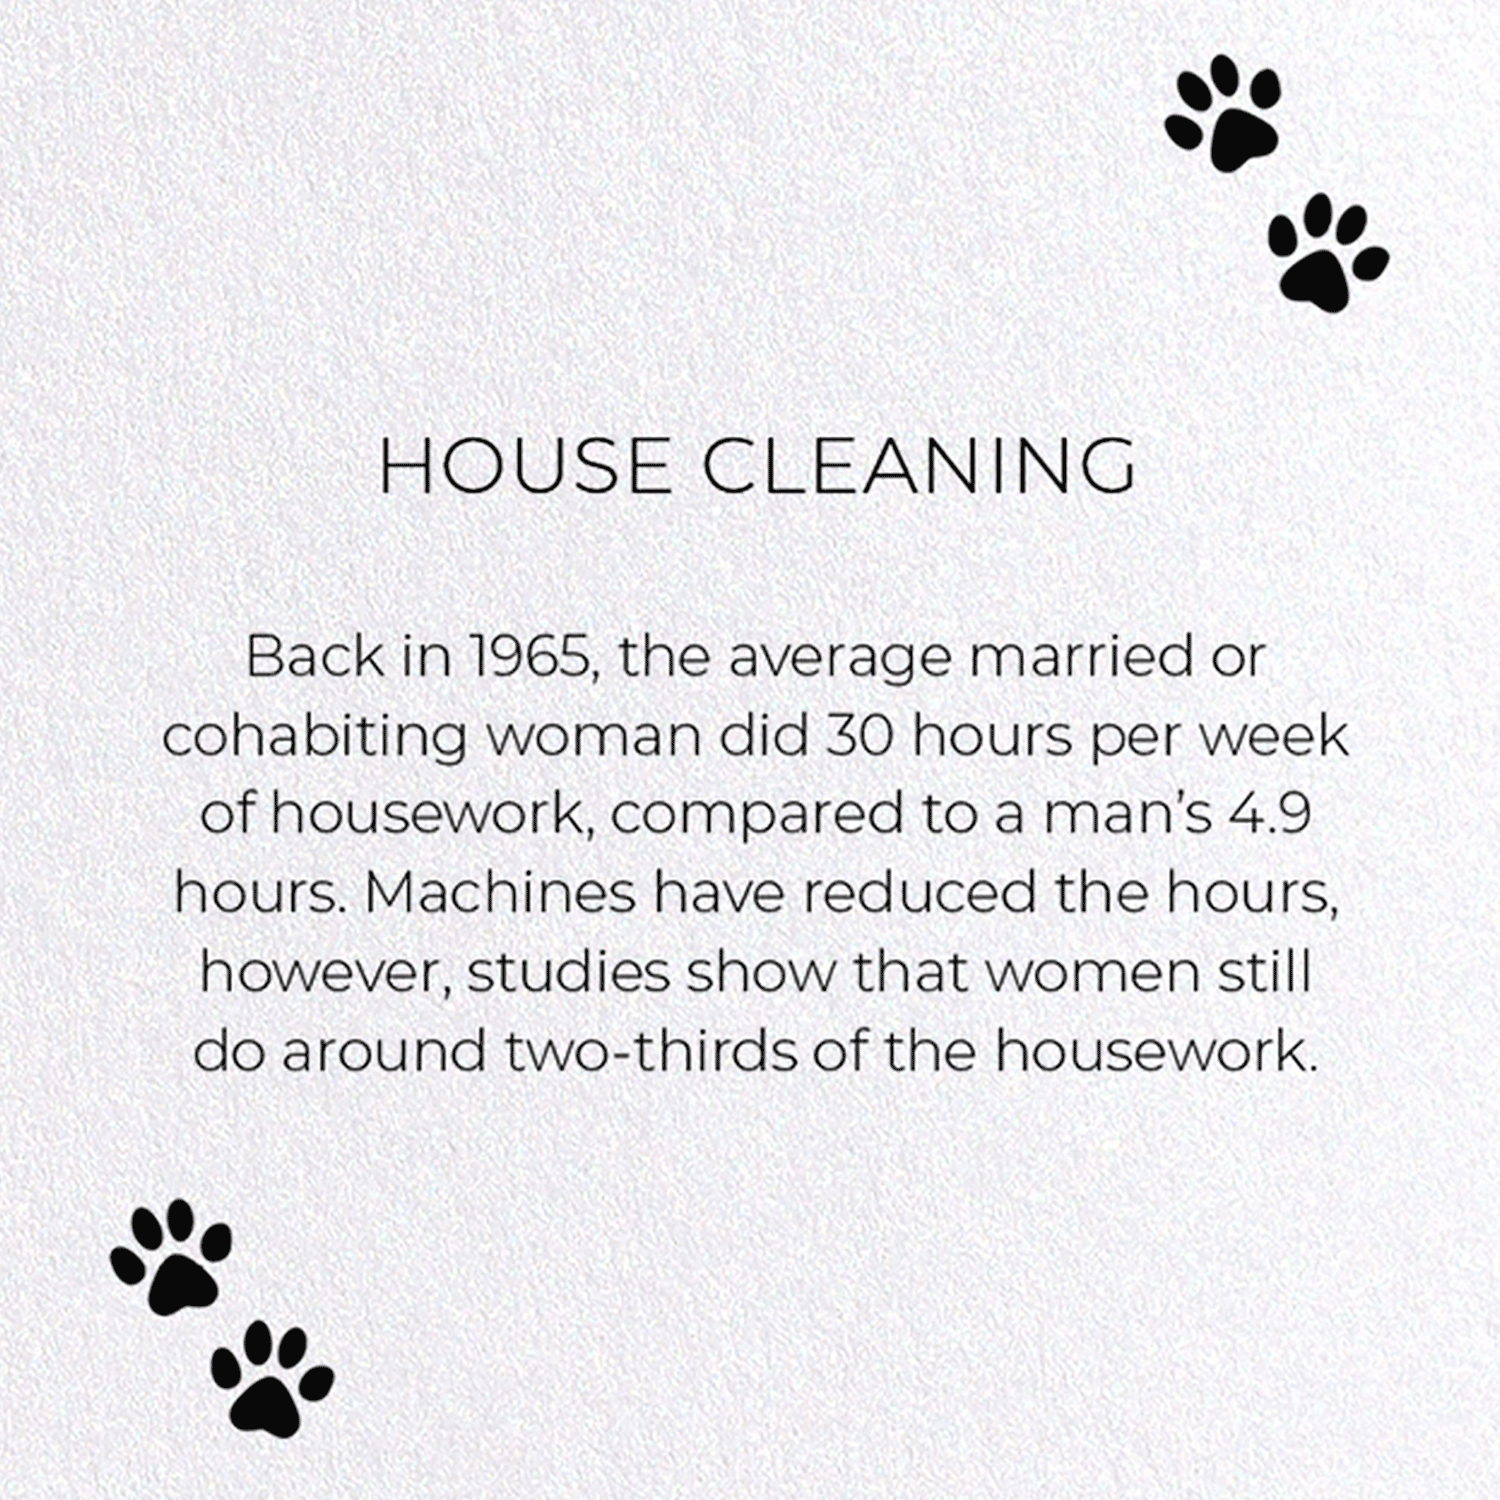 HOUSE CLEANING